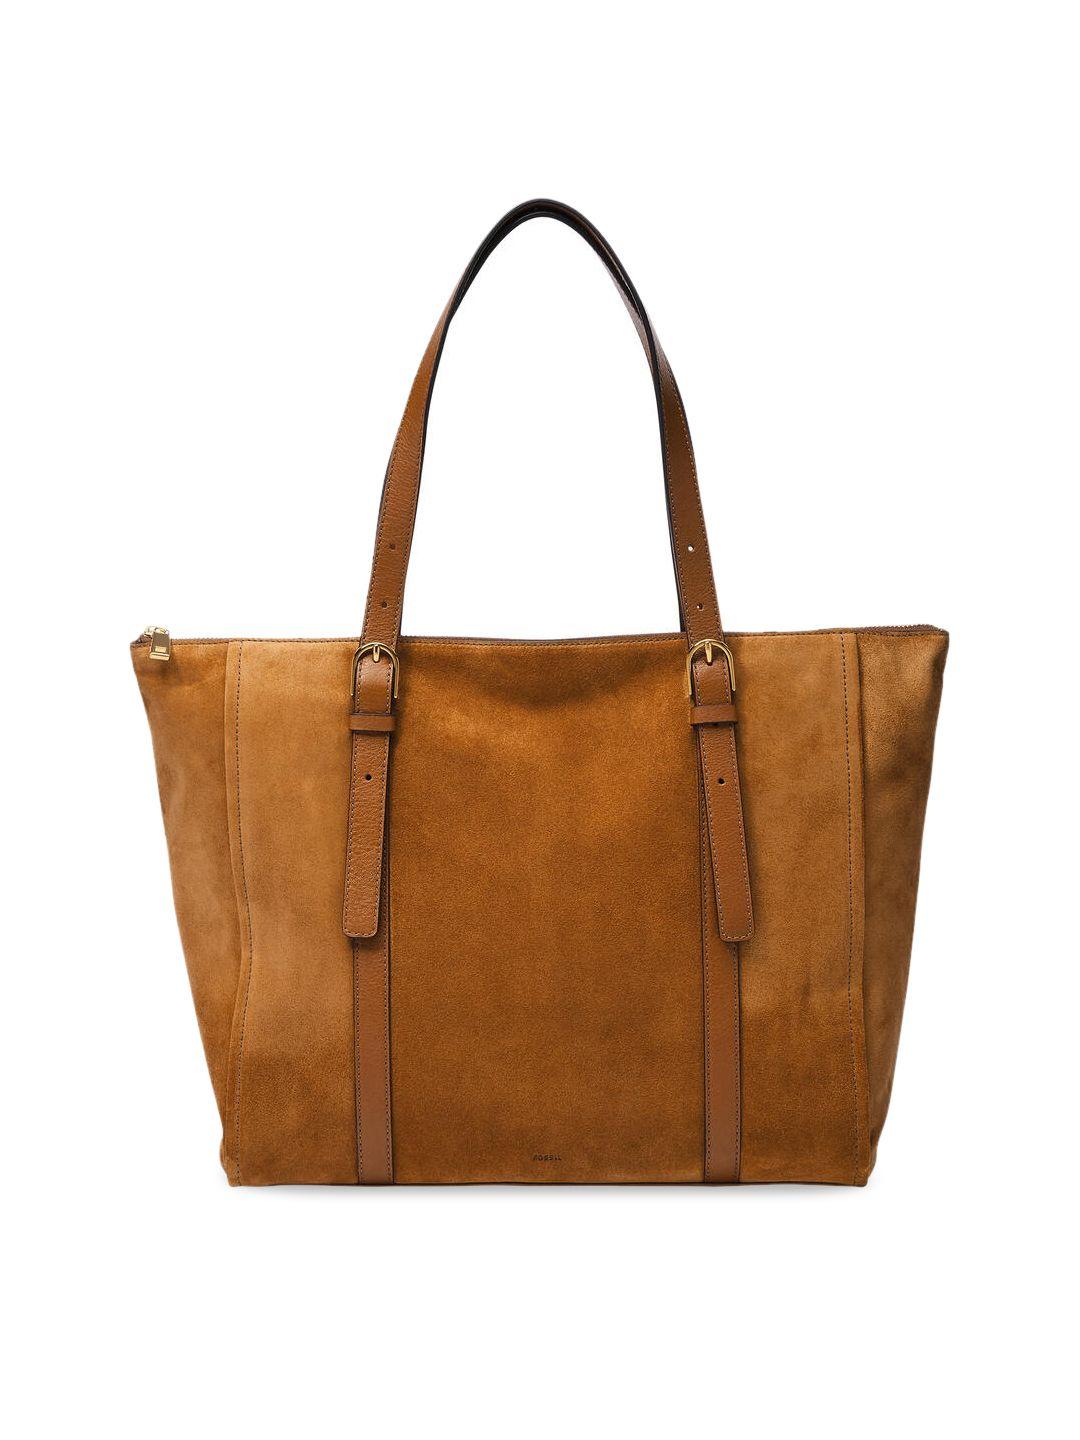 fossil brown suede oversized structured tote bag